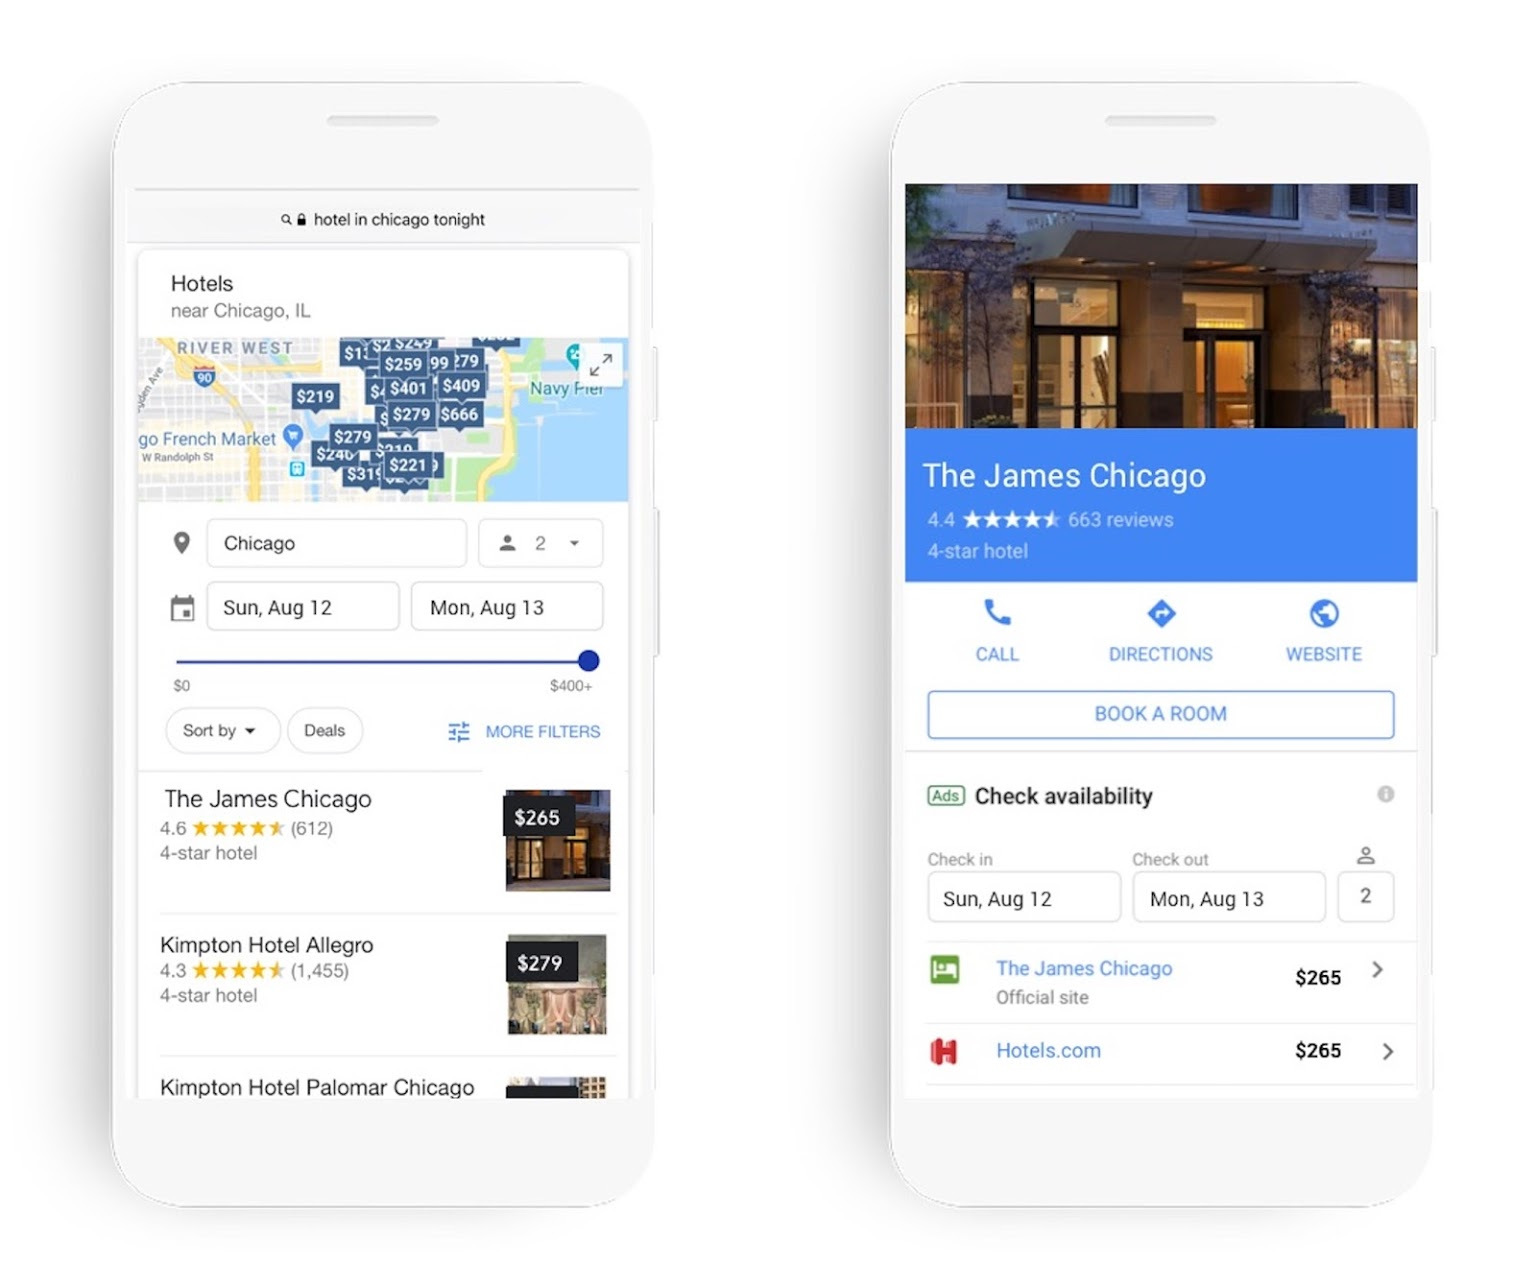 Google Hotel Maps and Google Hotels Ads by Bellebnb | Guide To Google Hotel Ads‎ Drive Bookings with Ads for Your Hotel Front Desk Reservation Calendar Drag and Drop, for Hotel · Hostel · B&B · Vacation Rental For Independent Properties and Group Hotel Chains